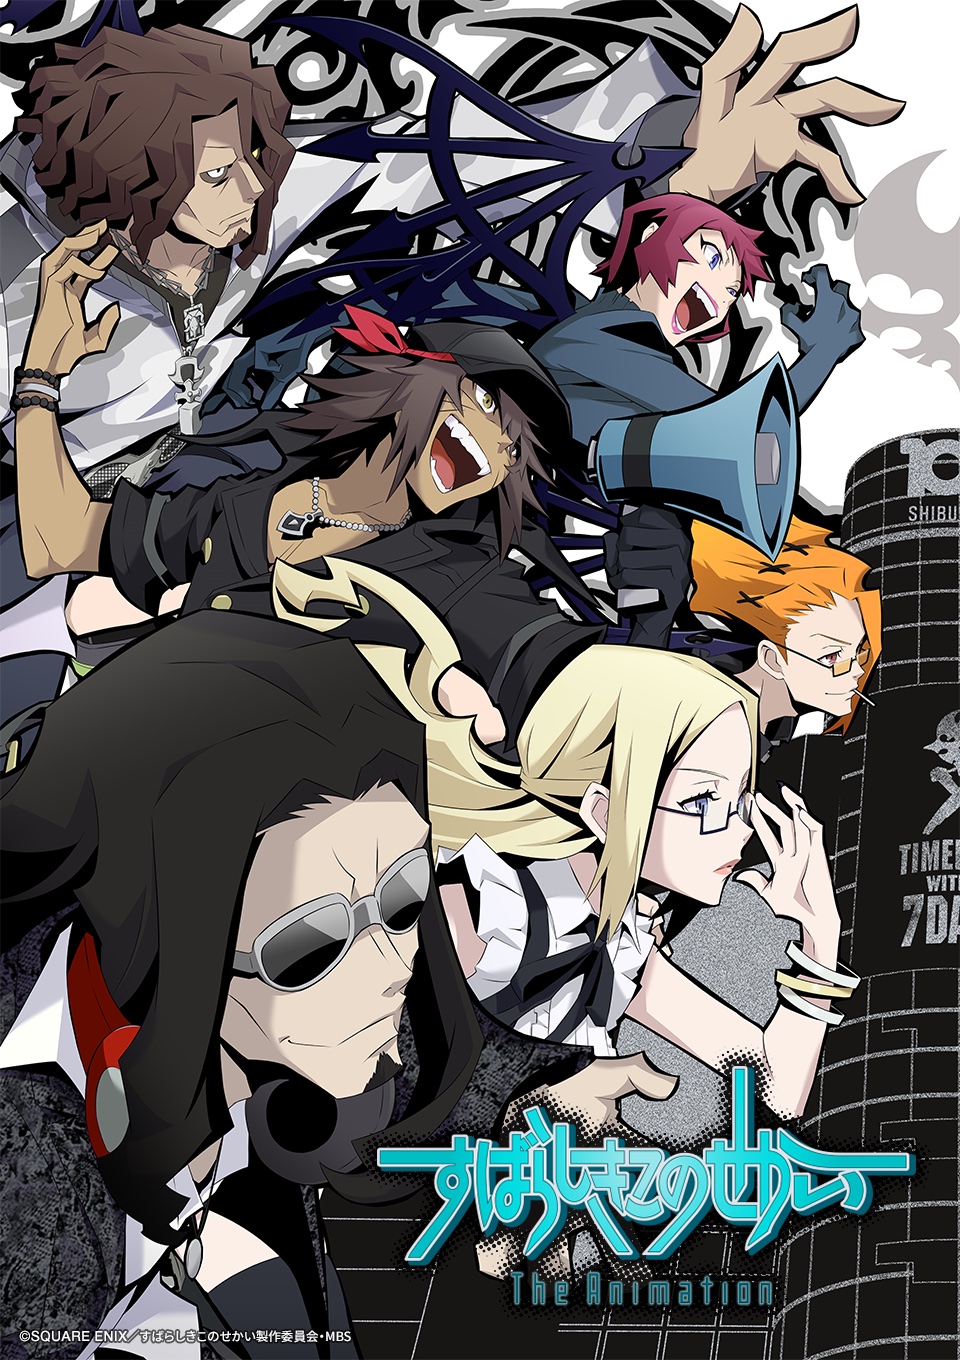 3º trailer de The World Ends With You The Animation